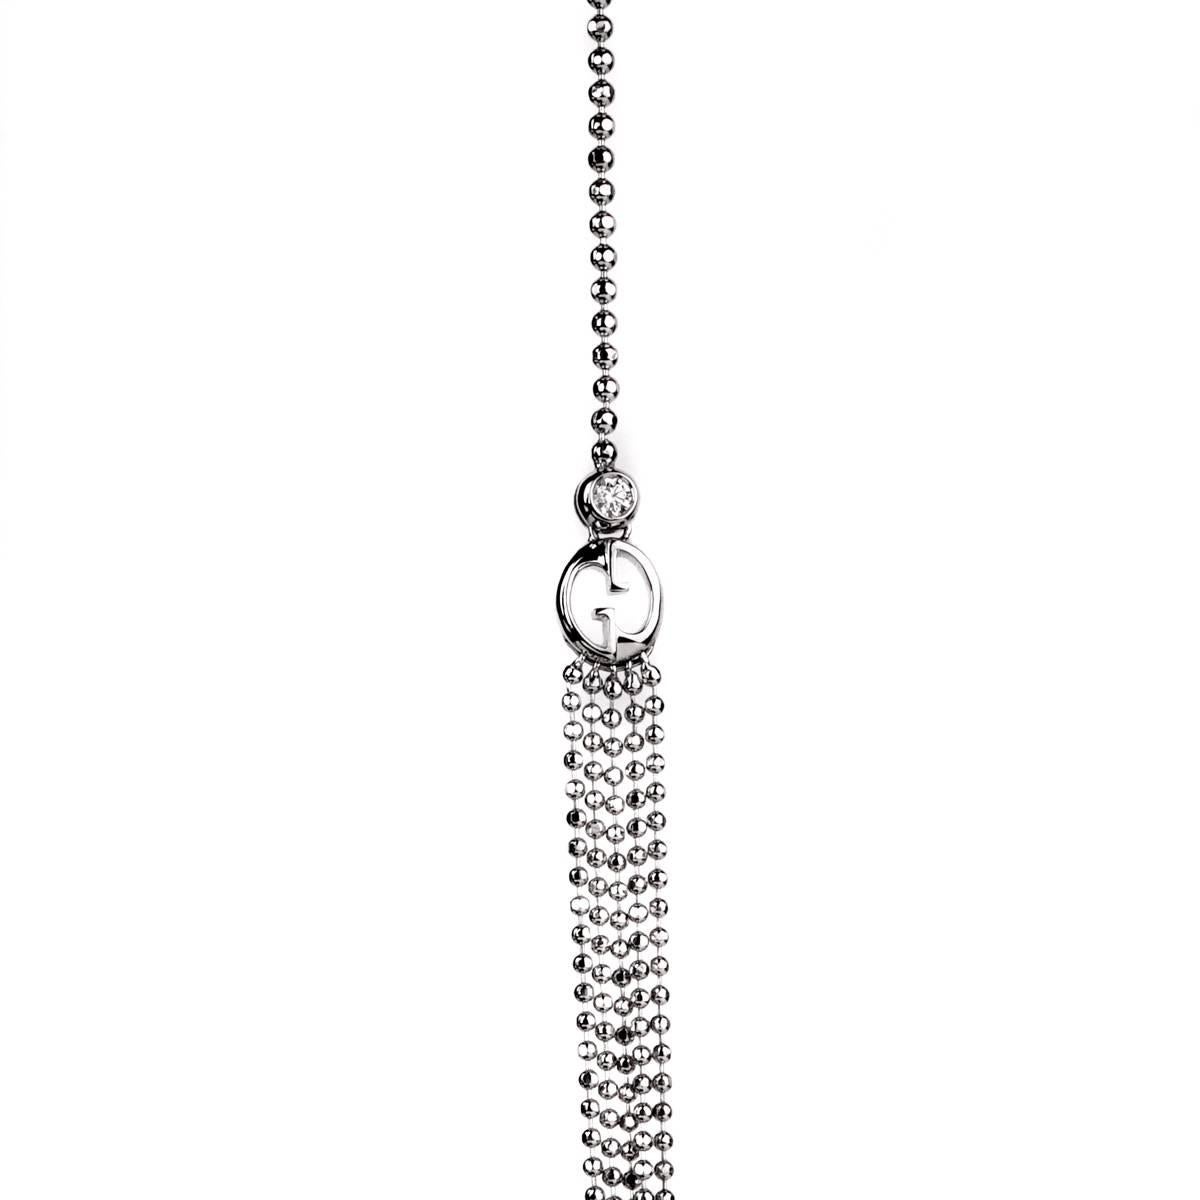 A fabulous multistrand Gucci necklace featuring 2 round brilliant cut diamonds set at the top of the double G motif elegantly transforming with 5 diamond cut white gold necklaces draping the front. Necklace length: 18